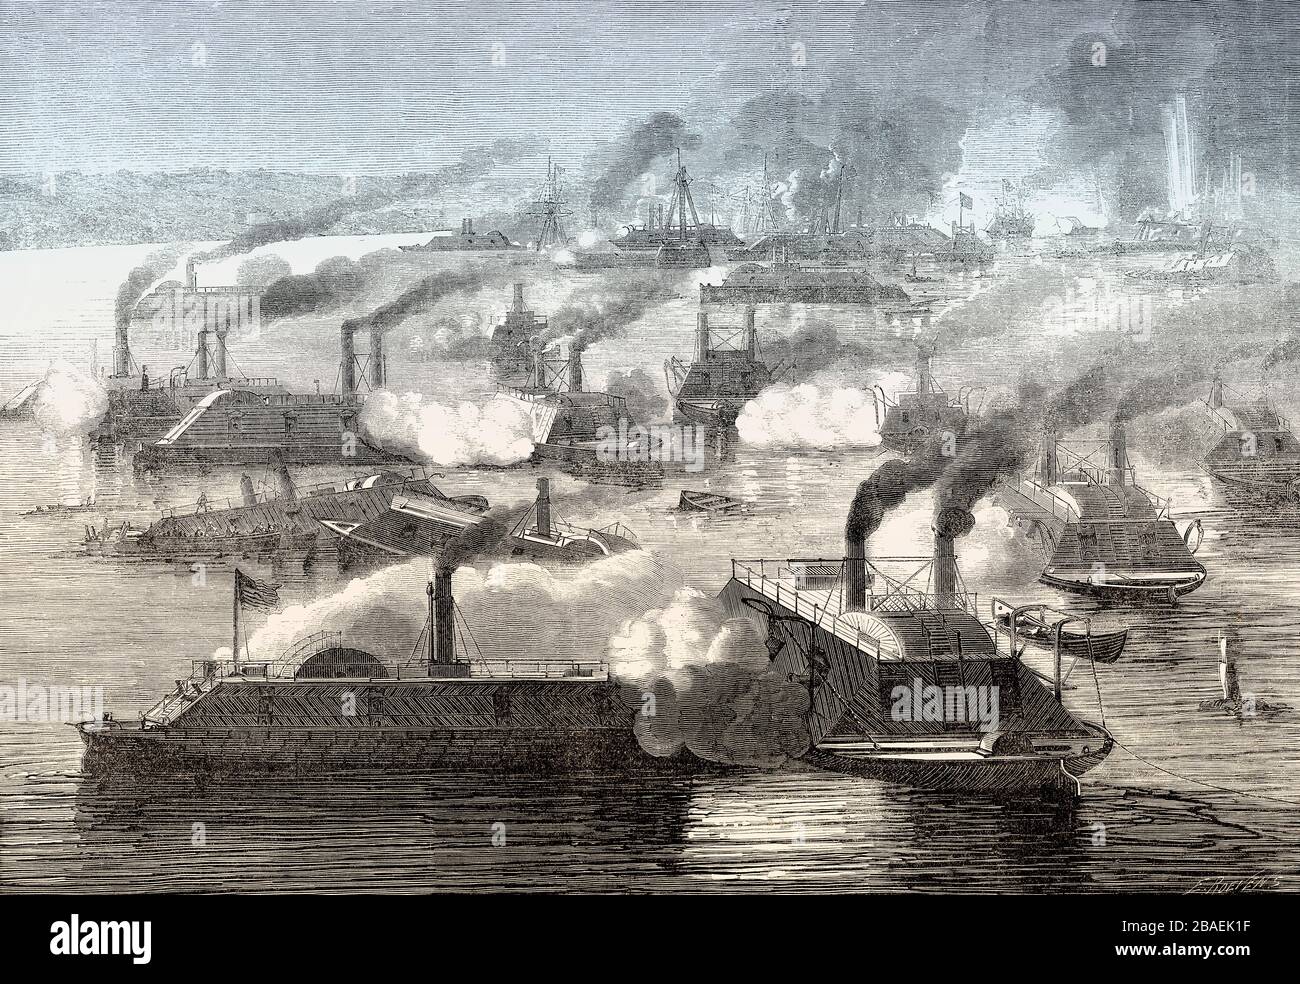 The First Battle of Memphis, Mississippi River, near the city of Memphis, Tennessee on June 6, 1862 Stock Photo